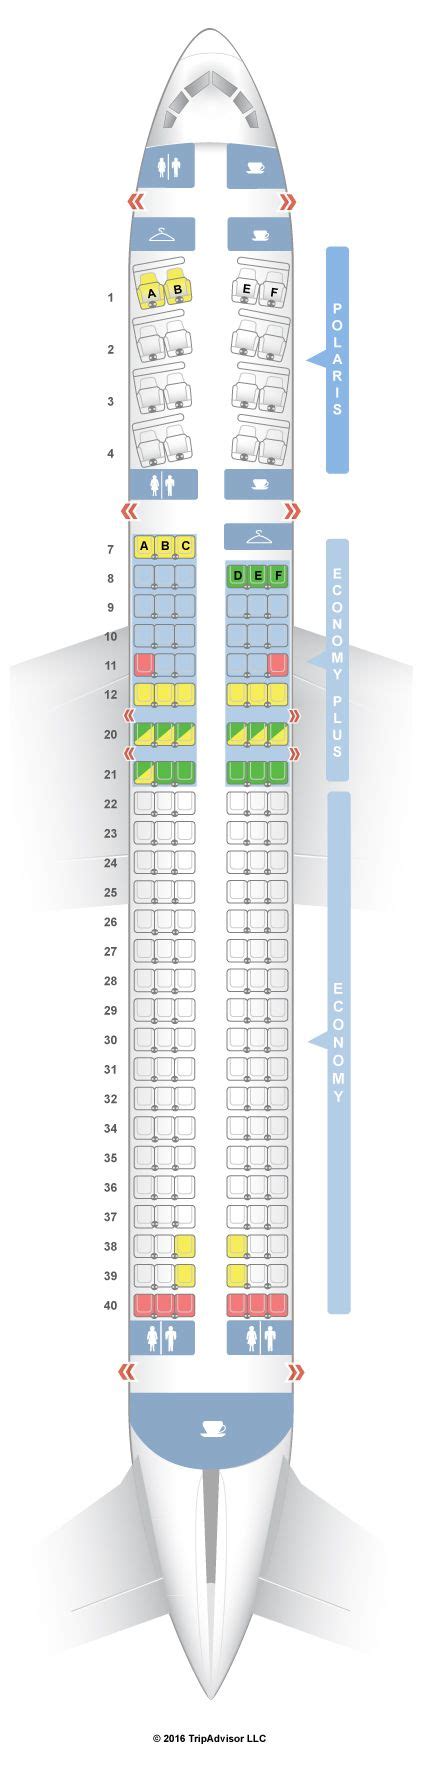 boeing 757 seating chart image